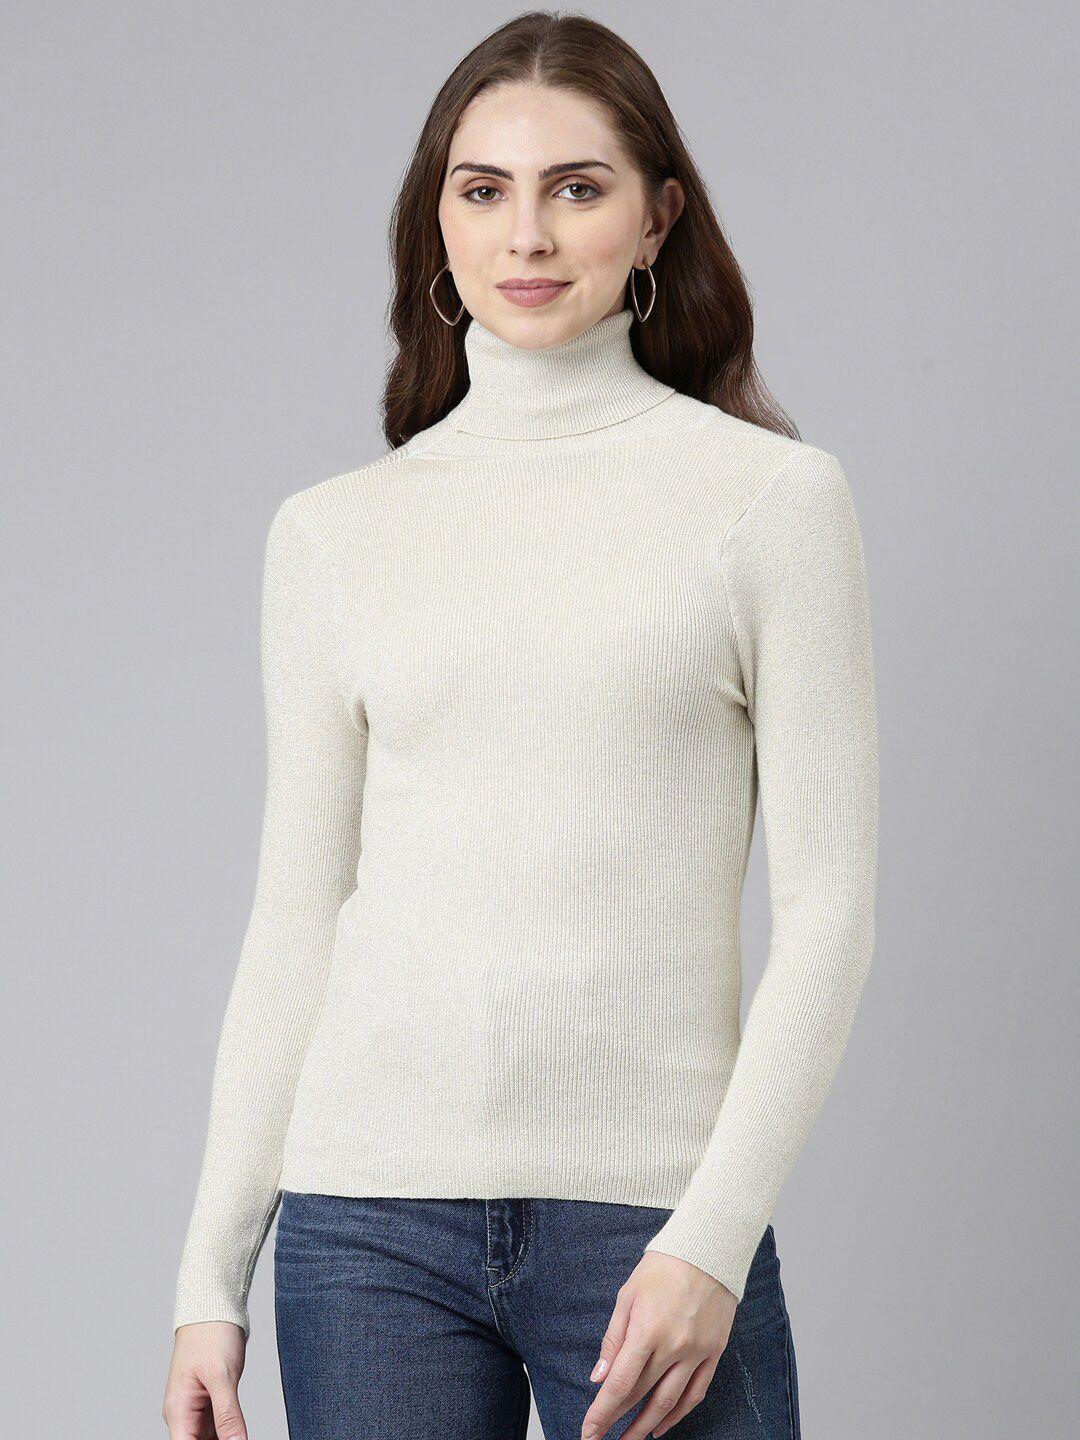 showoff-high-neck-long-sleeves-fitted-top